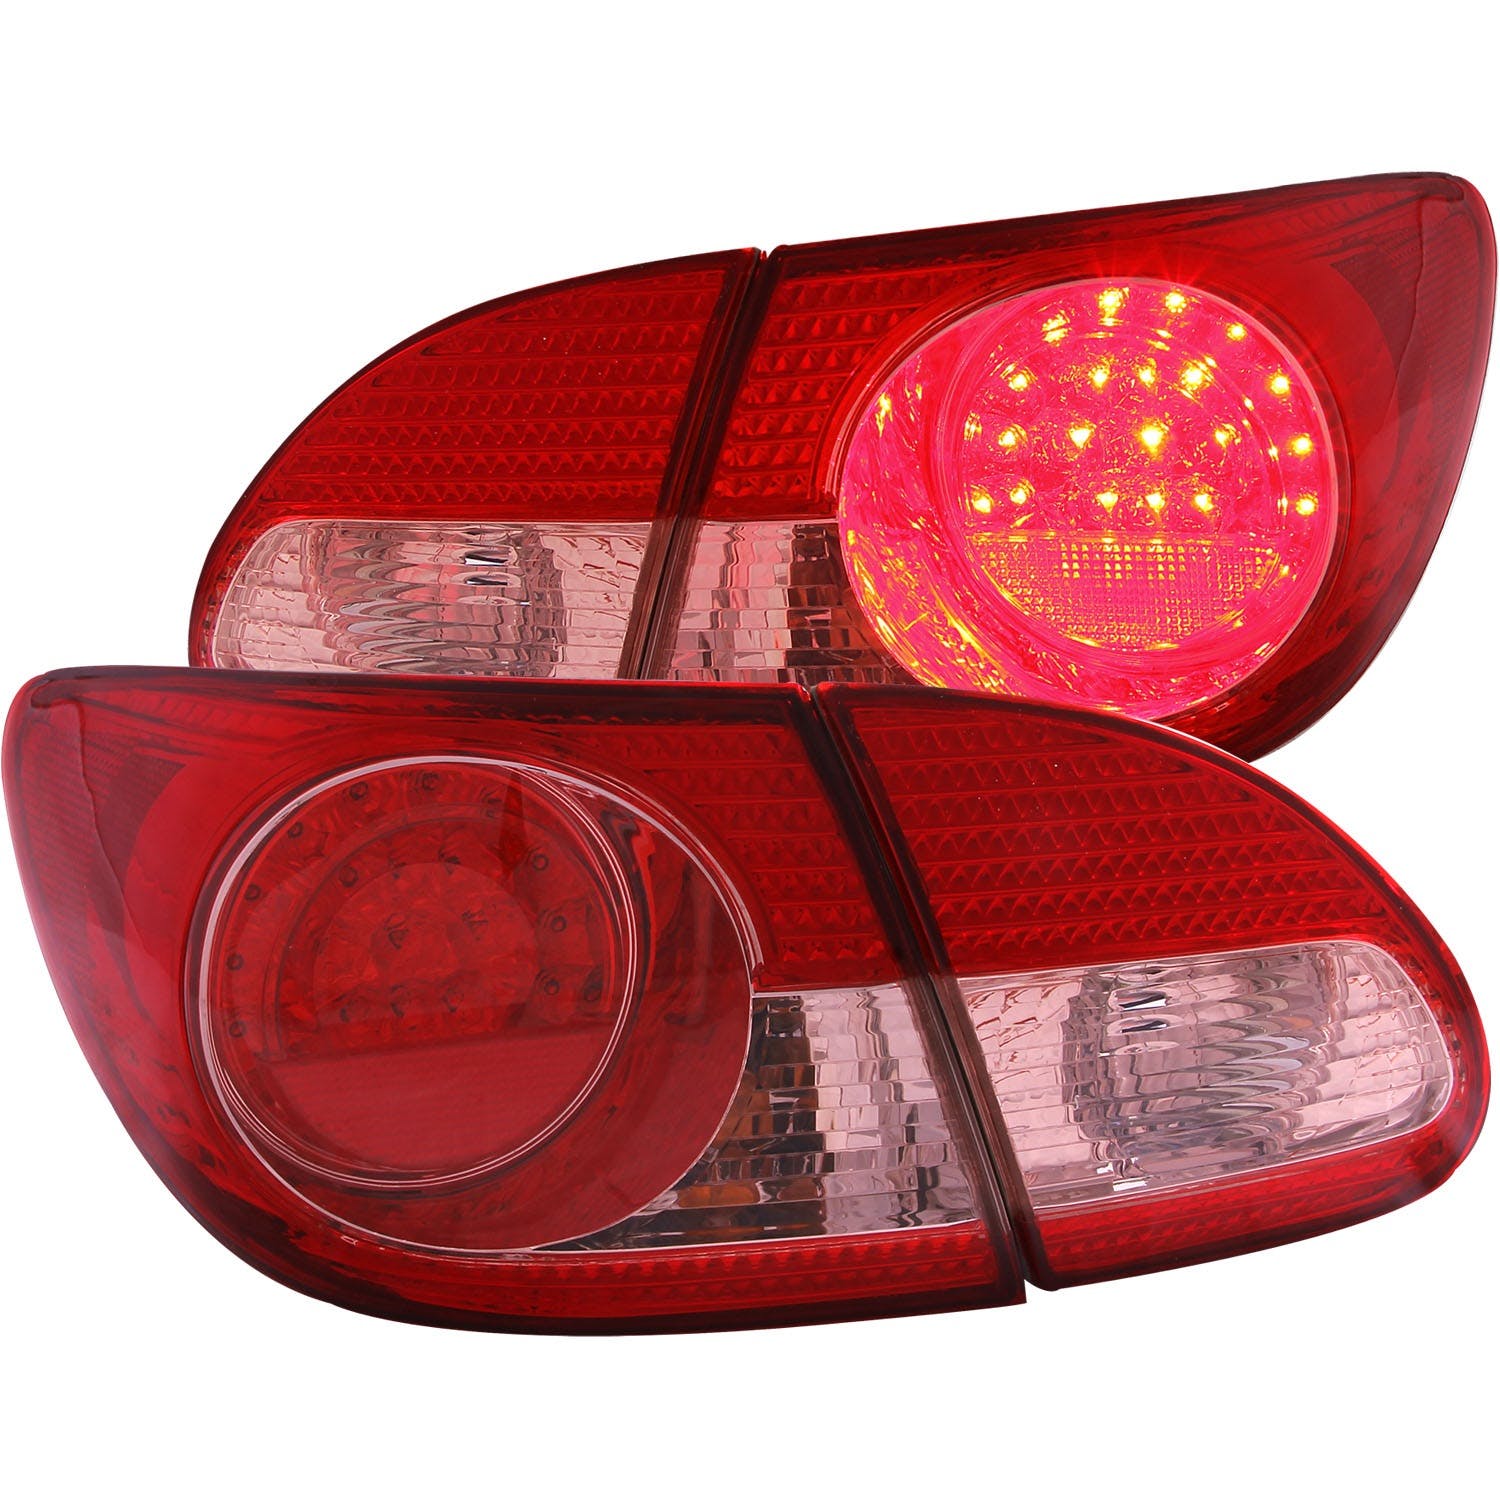 AnzoUSA 321190 LED Taillights Red Clear 4pc